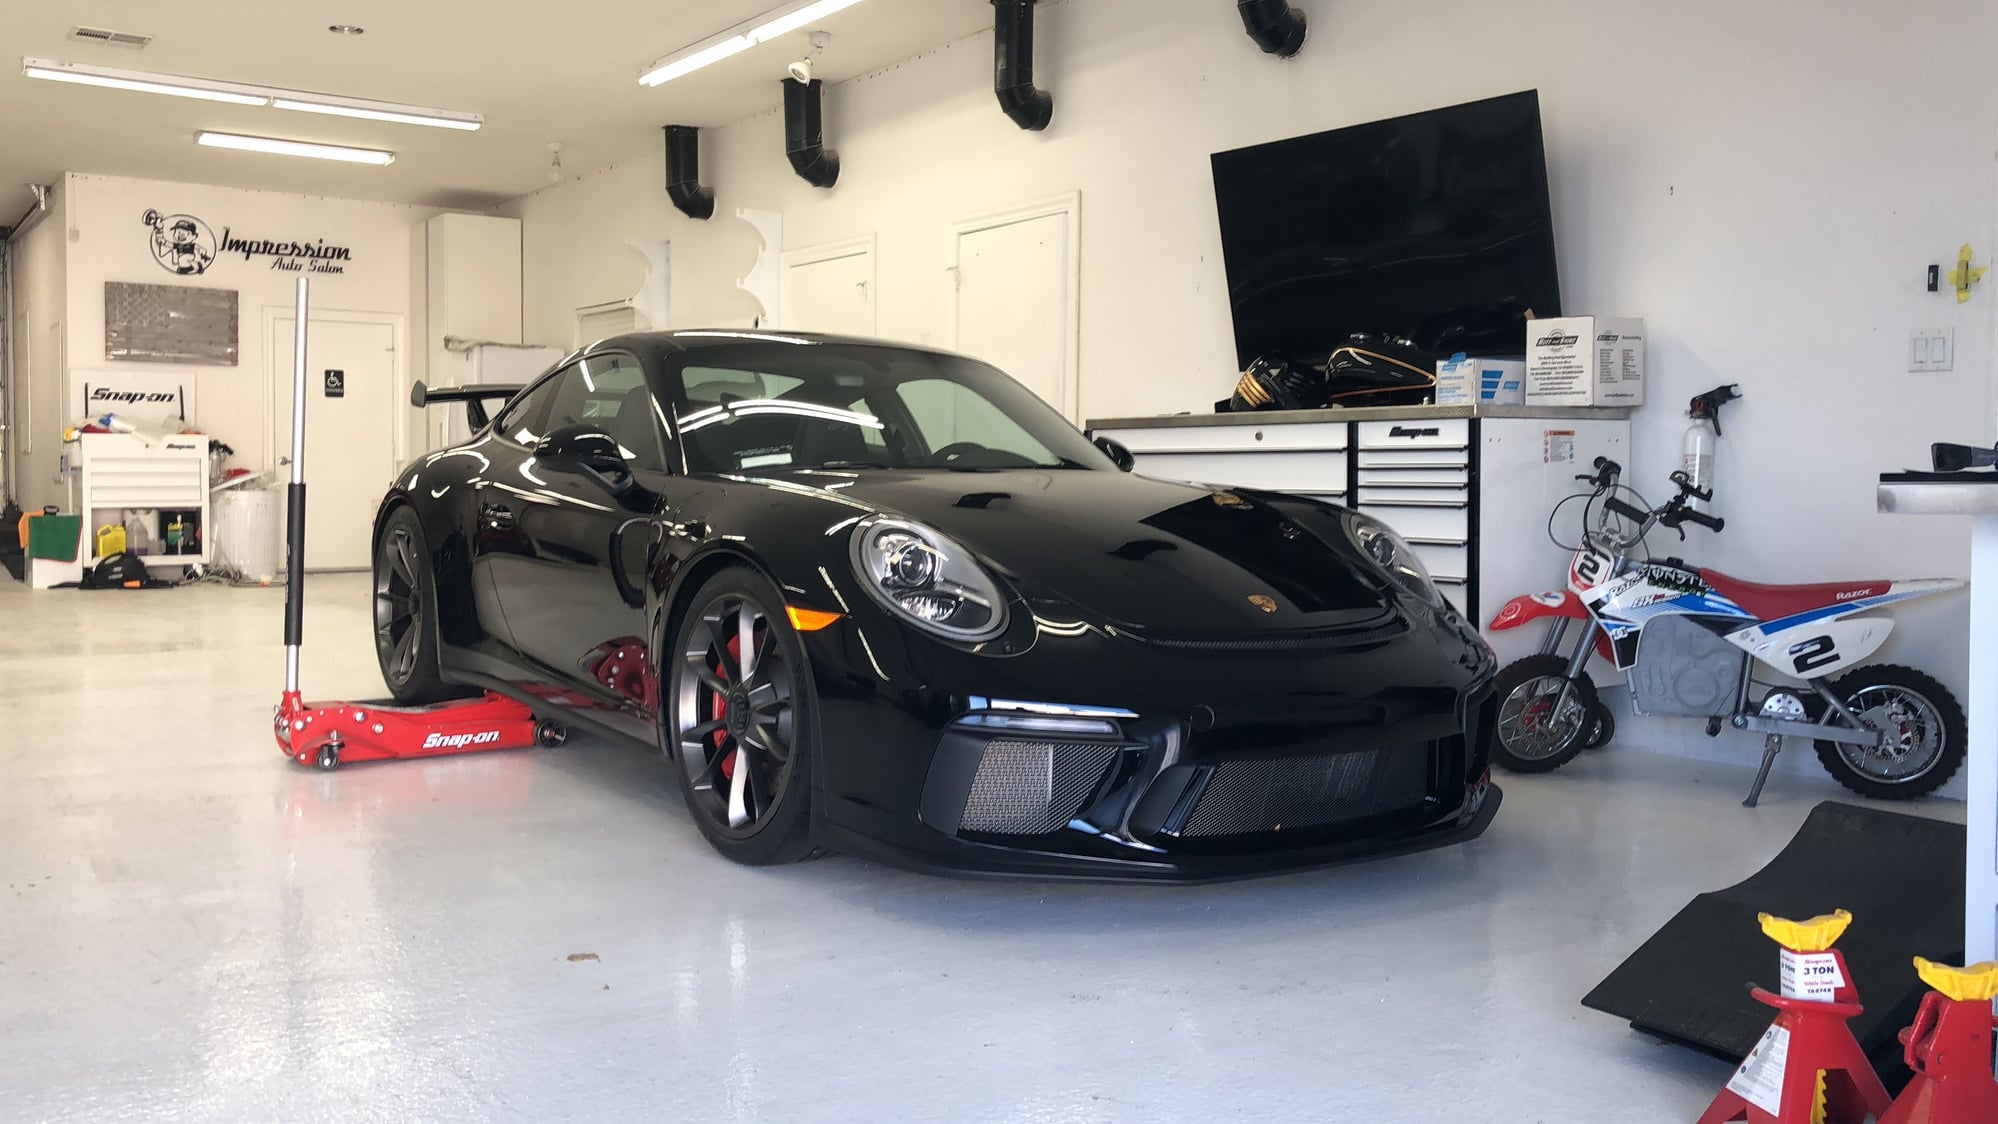 2018 Porsche GT3 - 2018 PDK .2 GT3 10K over MSRP - Used - VIN WP0AC2A93JS174767 - 2,900 Miles - 6 cyl - 2WD - Automatic - Coupe - Black - Los Angeles, CA 90272, United States